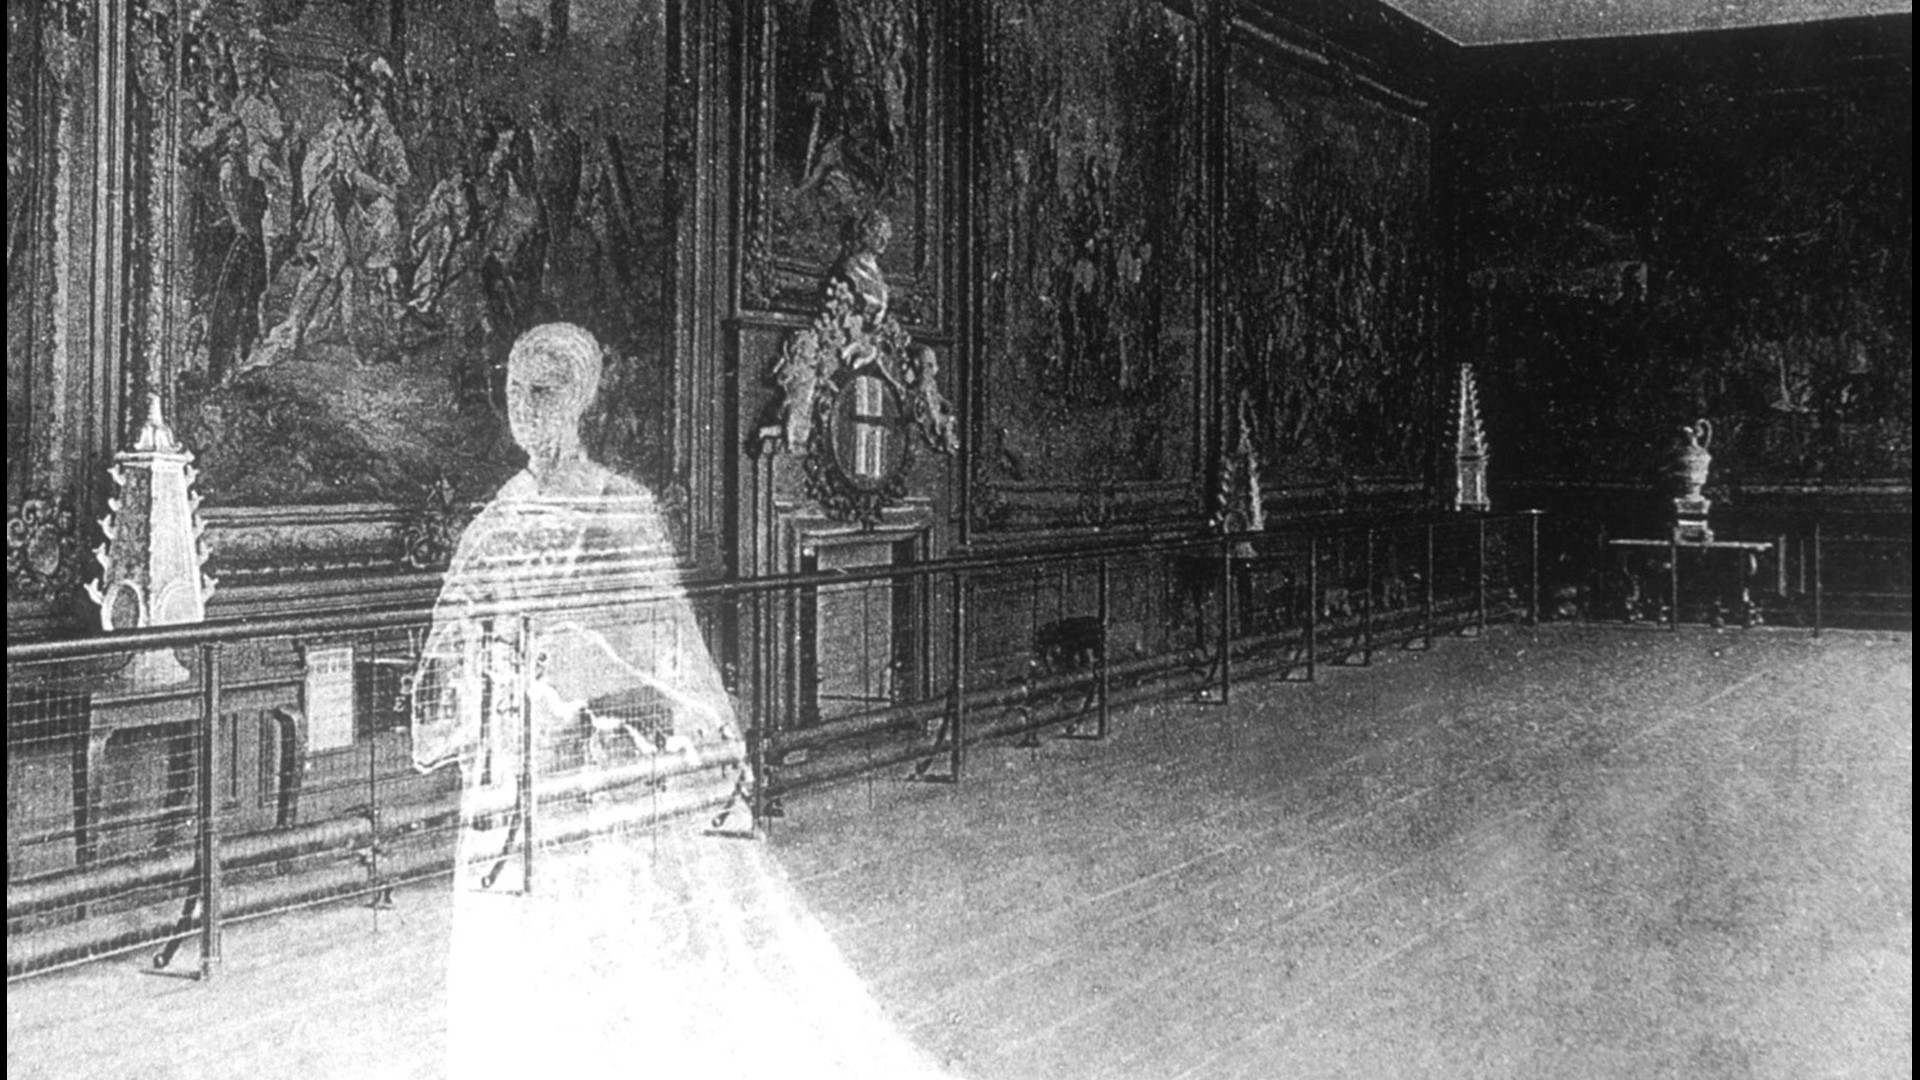 In the darkest nooks and spookiest corners of the Hampton Court Palace, tales of ghosts and hauntings have captivated the minds of inhabitants and visitors alike. Buzz60's Maria Mercedes Galuppo has the story.